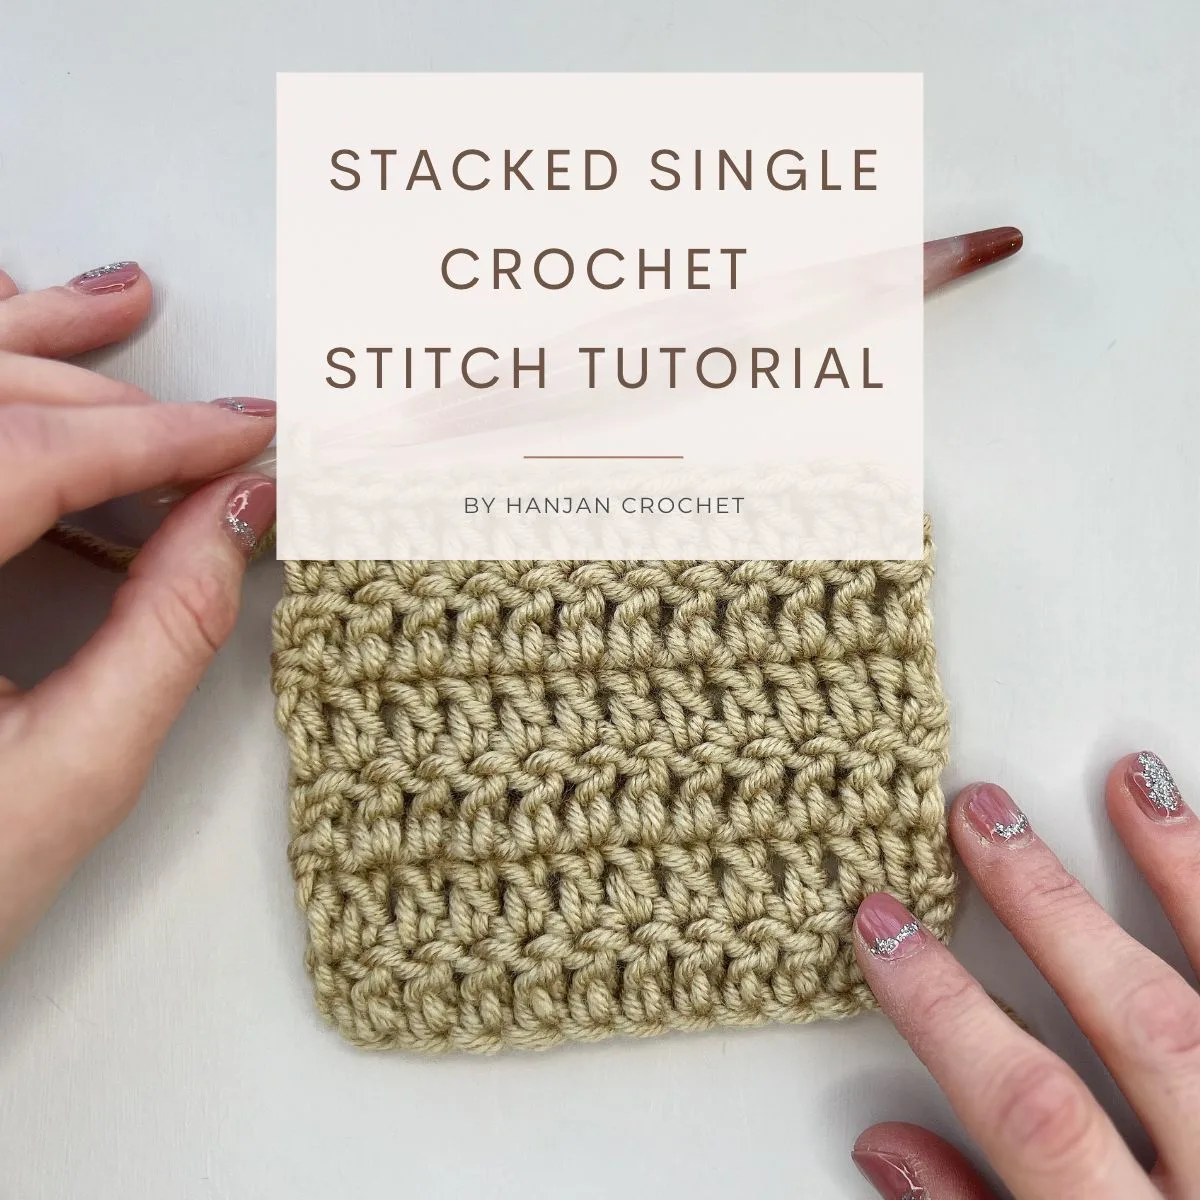 Image showing how to work a stacked single crochet stitch.